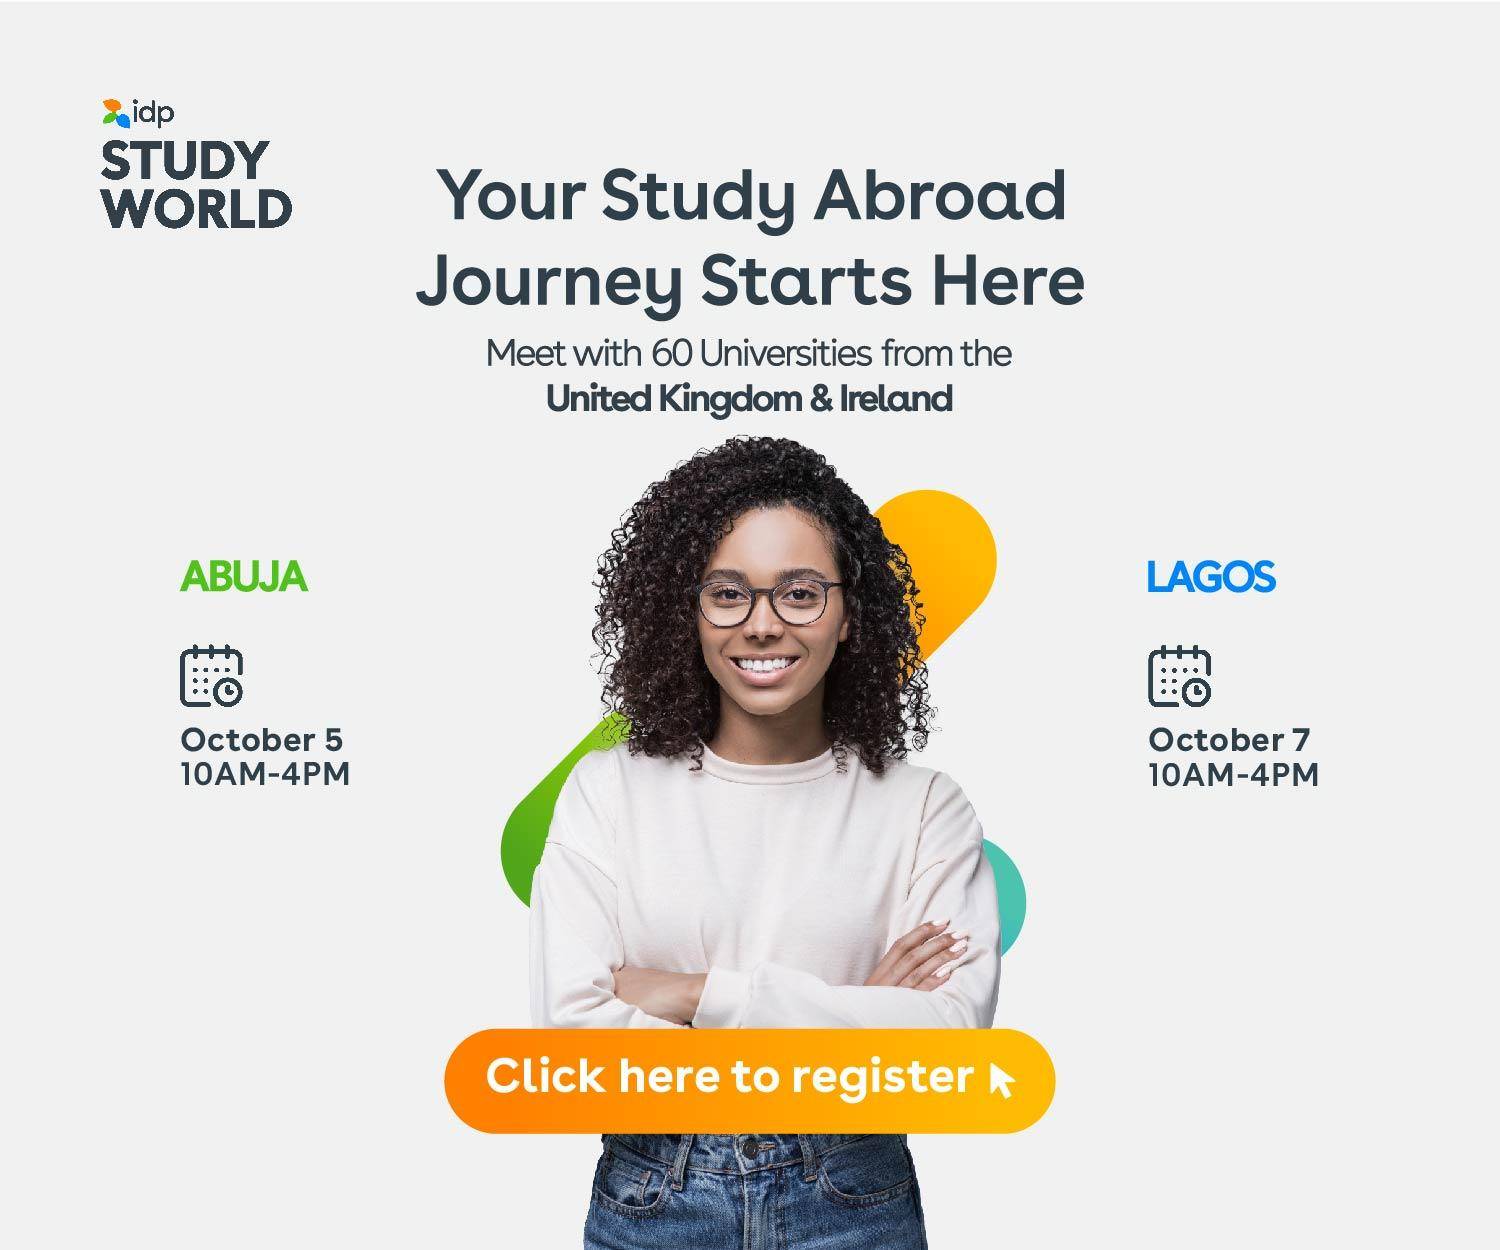 Your study abroad journey starts here - Meet with 60 Universities from the United Kingdom & Ireland - Click here to register - IDP Study World - SB